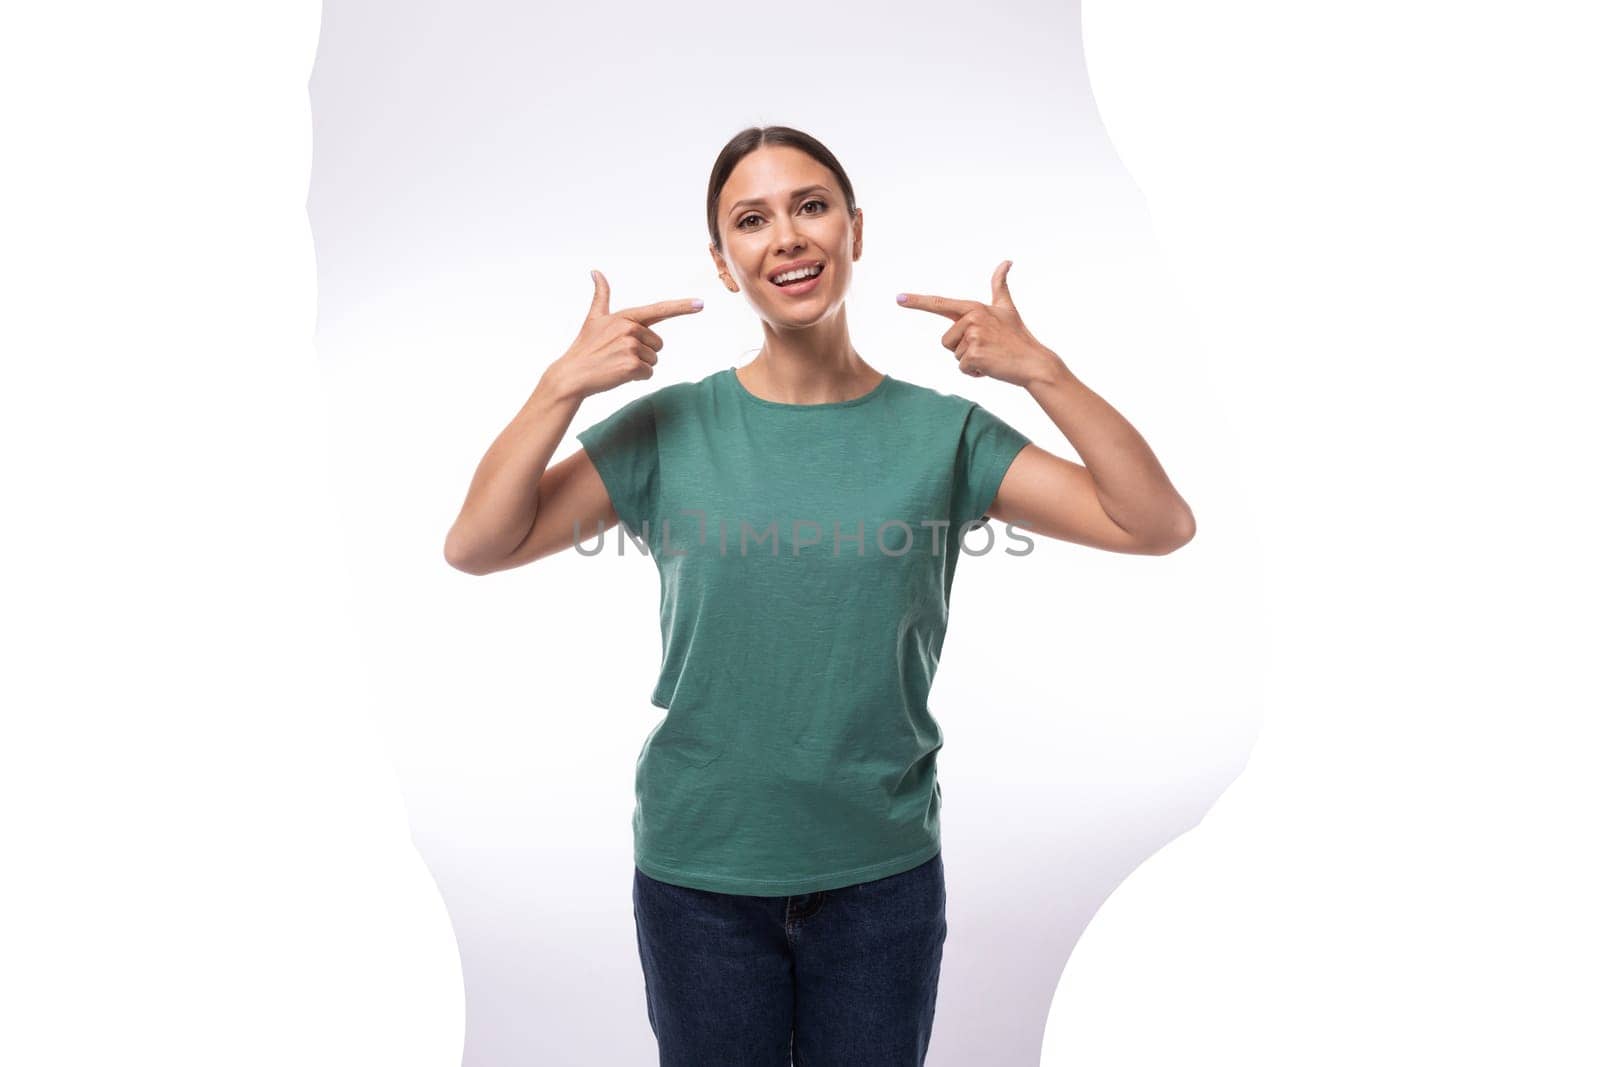 30 year old smiling slender brunette woman with collected hair is dressed in a green basic t-shirt and jeans.